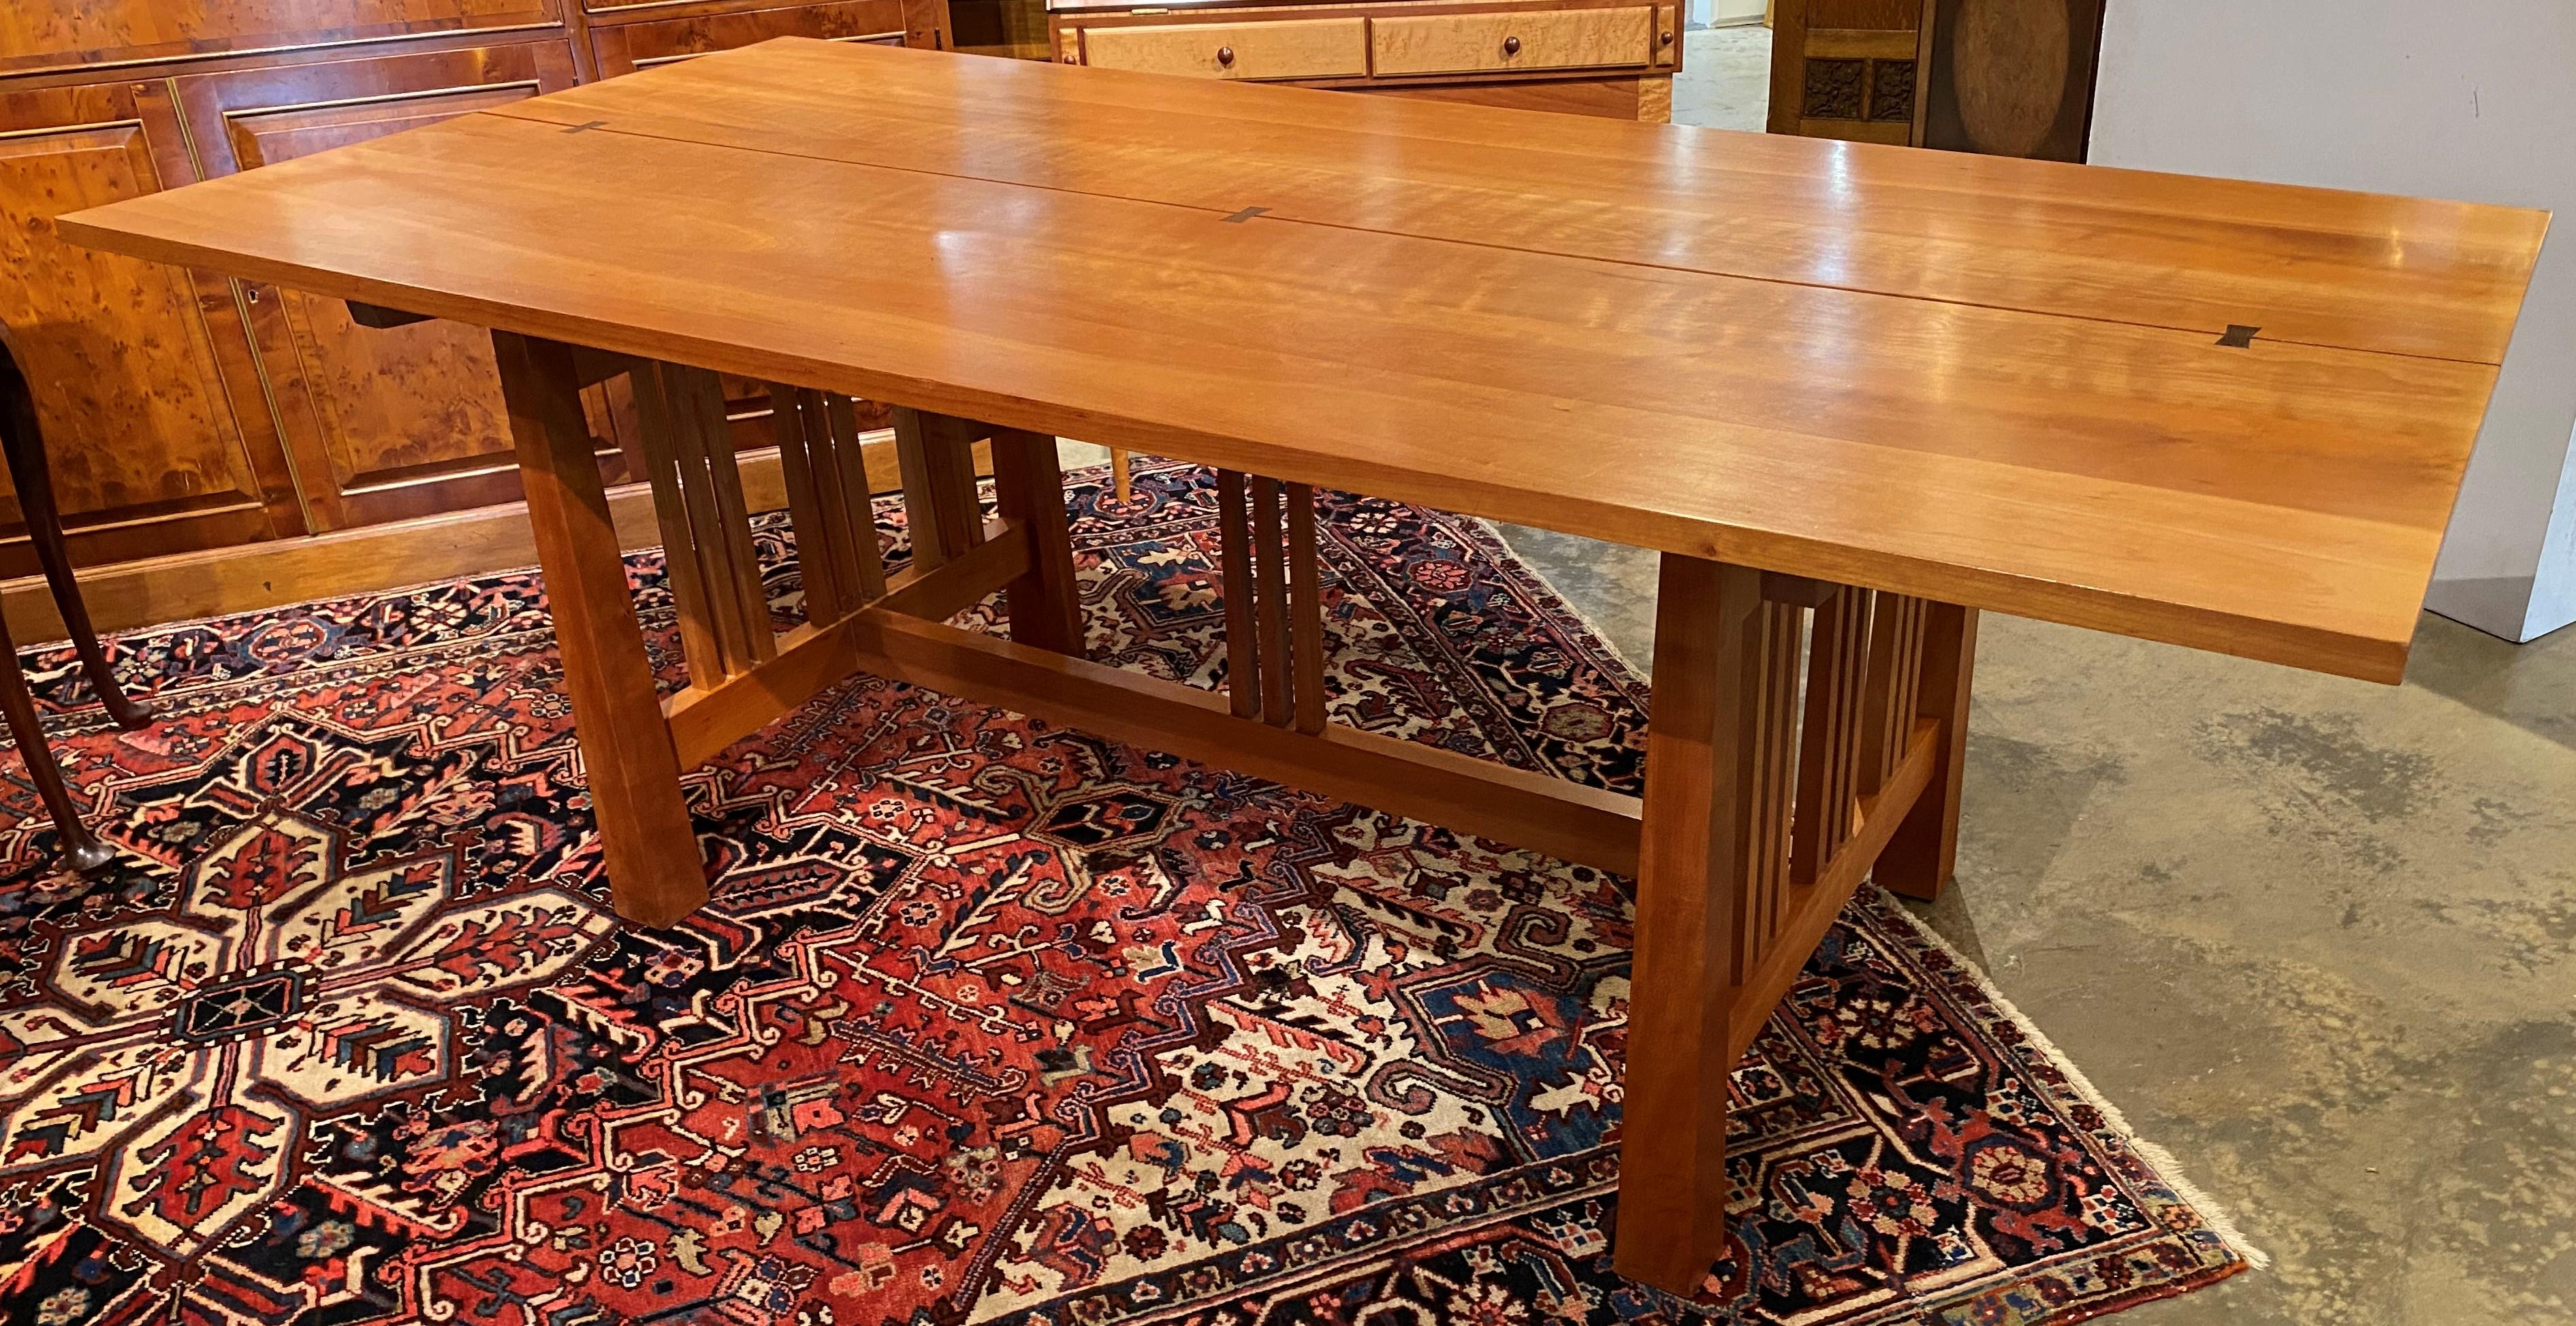 An exceptional quality cherry Vermont bench made Arts & Crafts style dining table with six chairs, including two arm chairs and four side chairs, butterfly jointed top, tapered legs, and attractive foliate upholstered seats. Each chair is hand